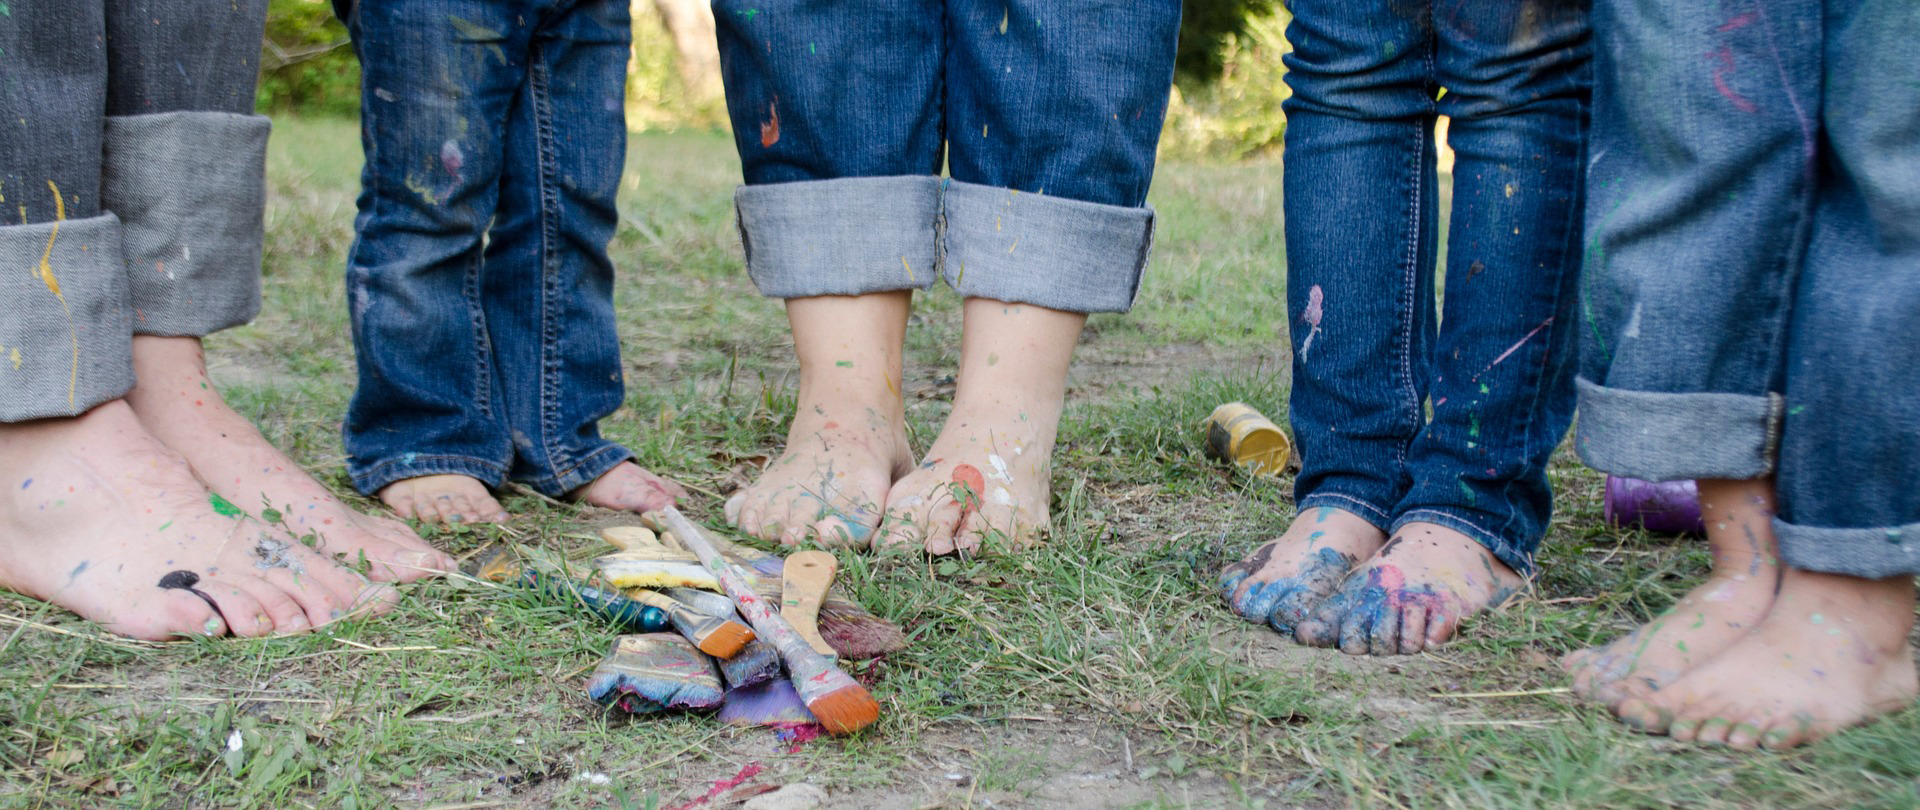 Adoption Centre of British Columbia - Family painted feet